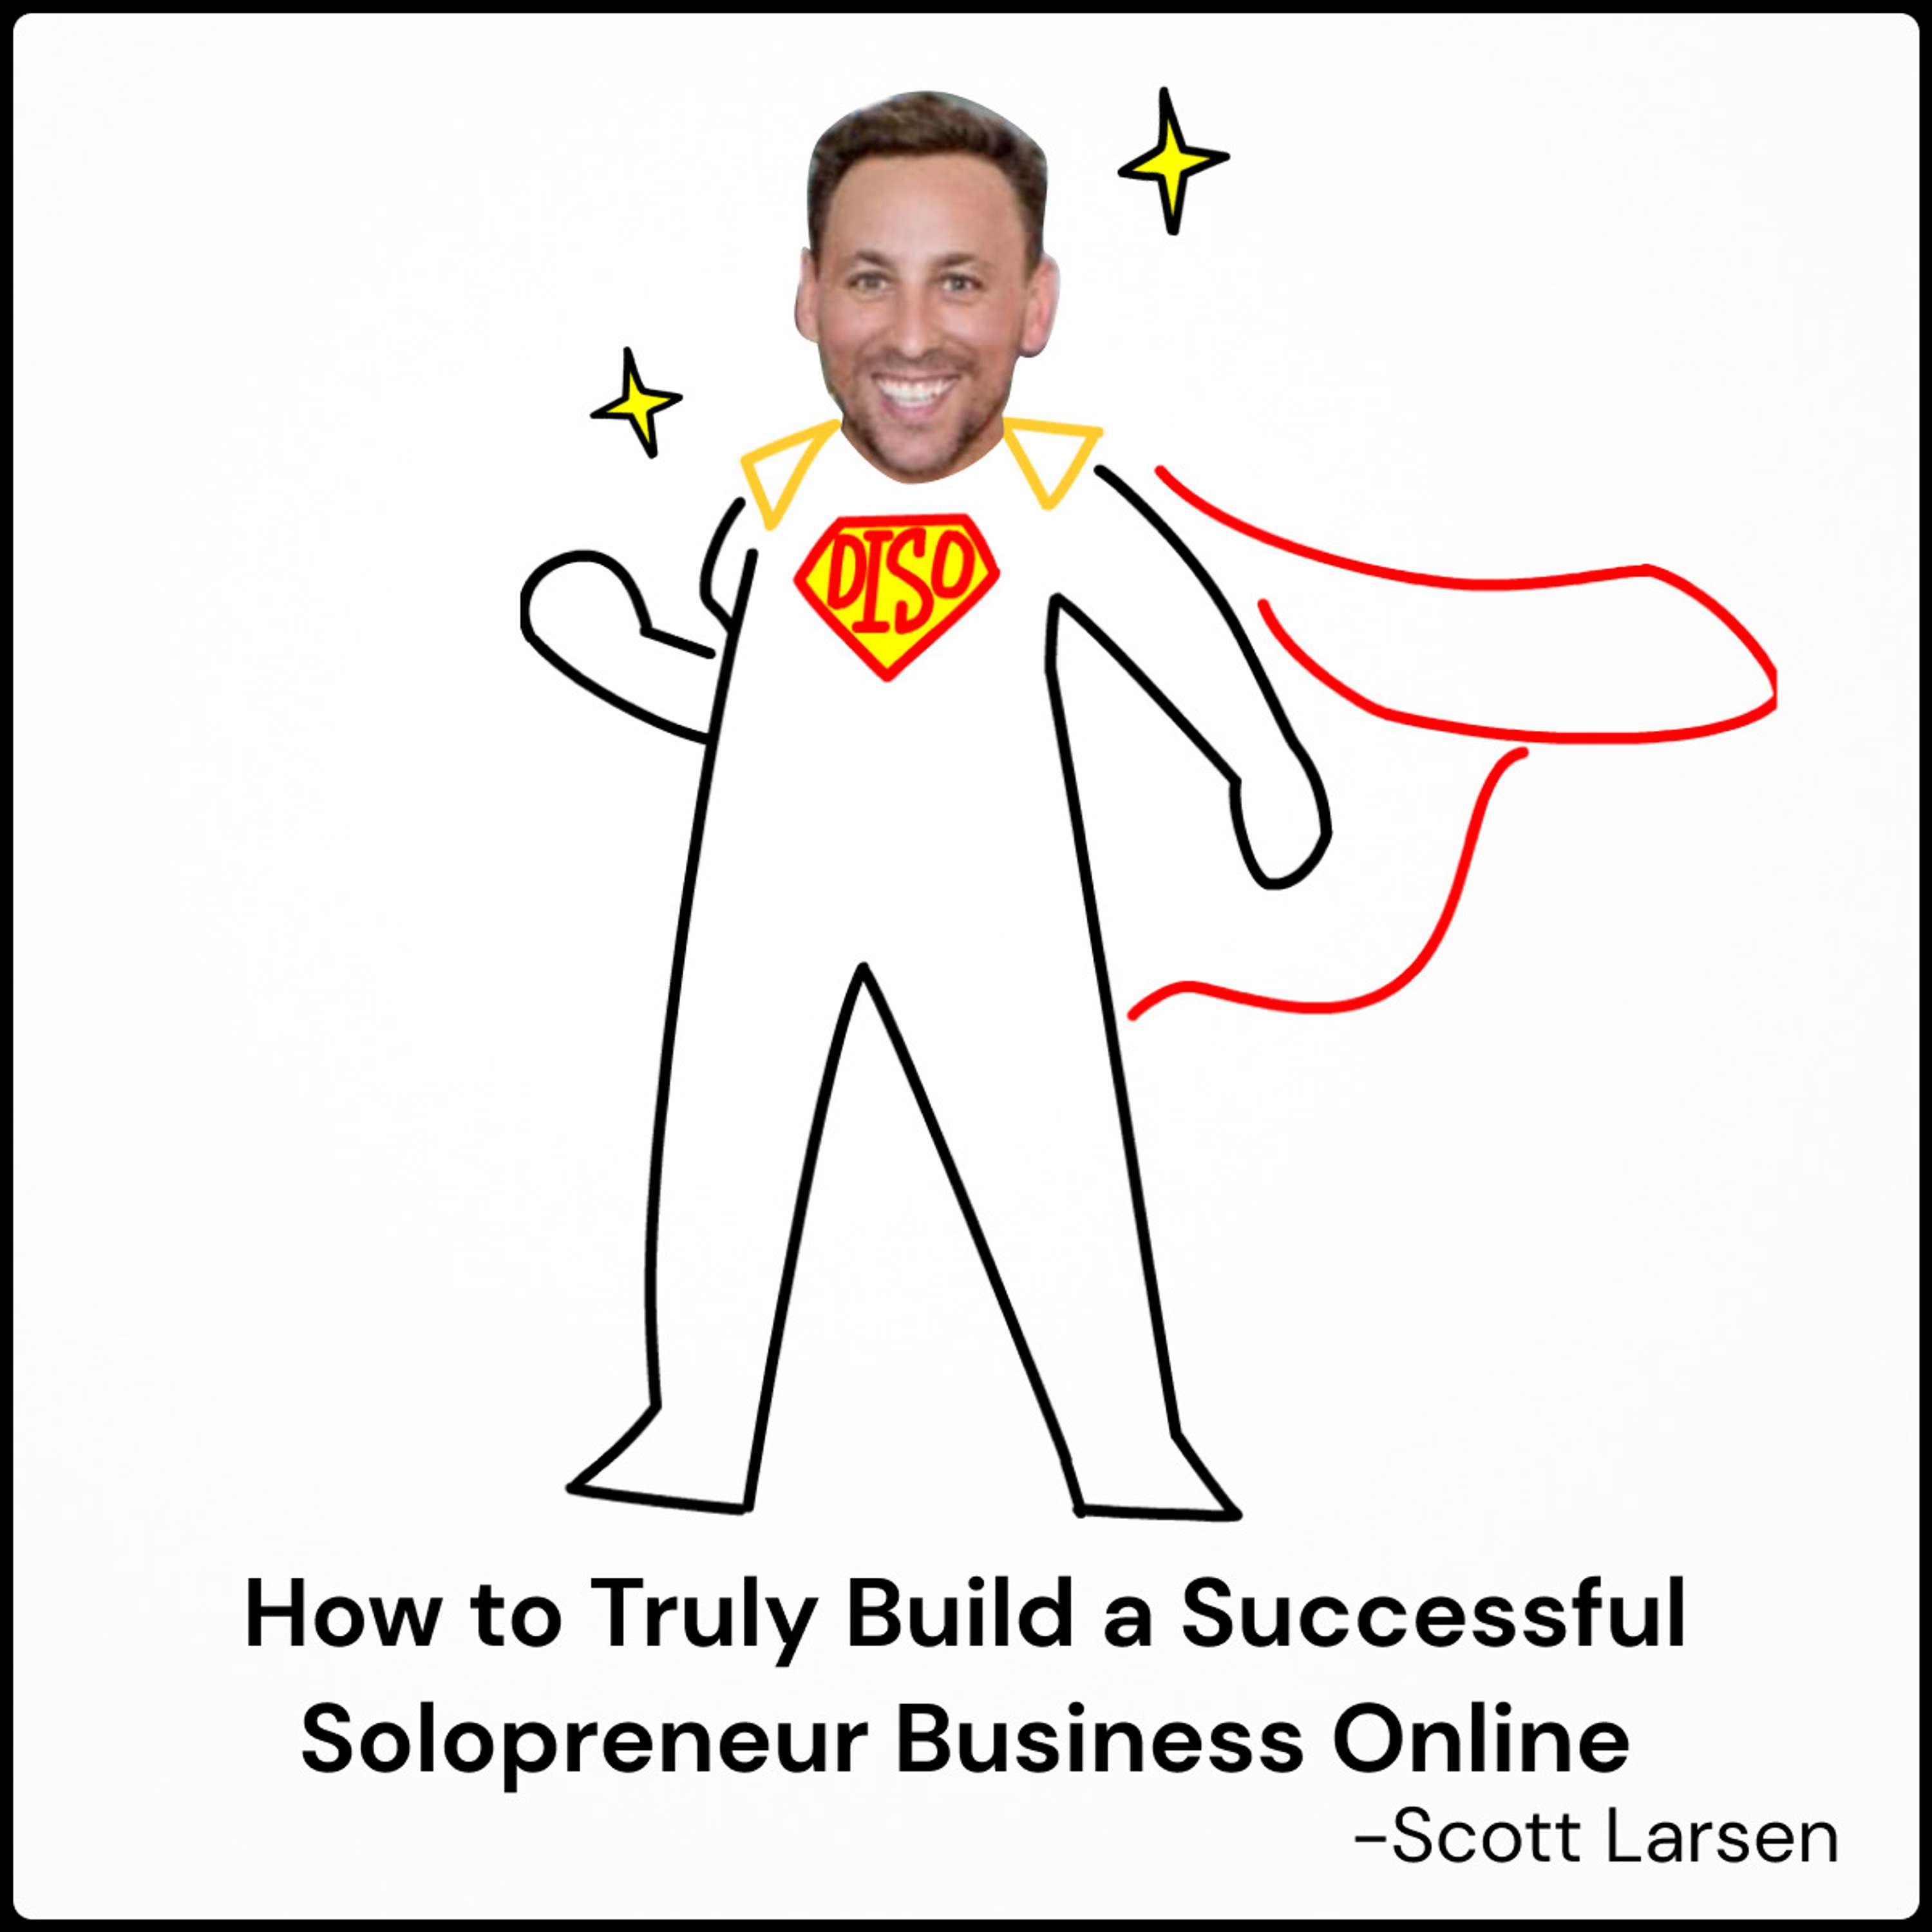 How to truly build a successful solopreneur business online -DISO with Scott Larsen from Le Bono Collection